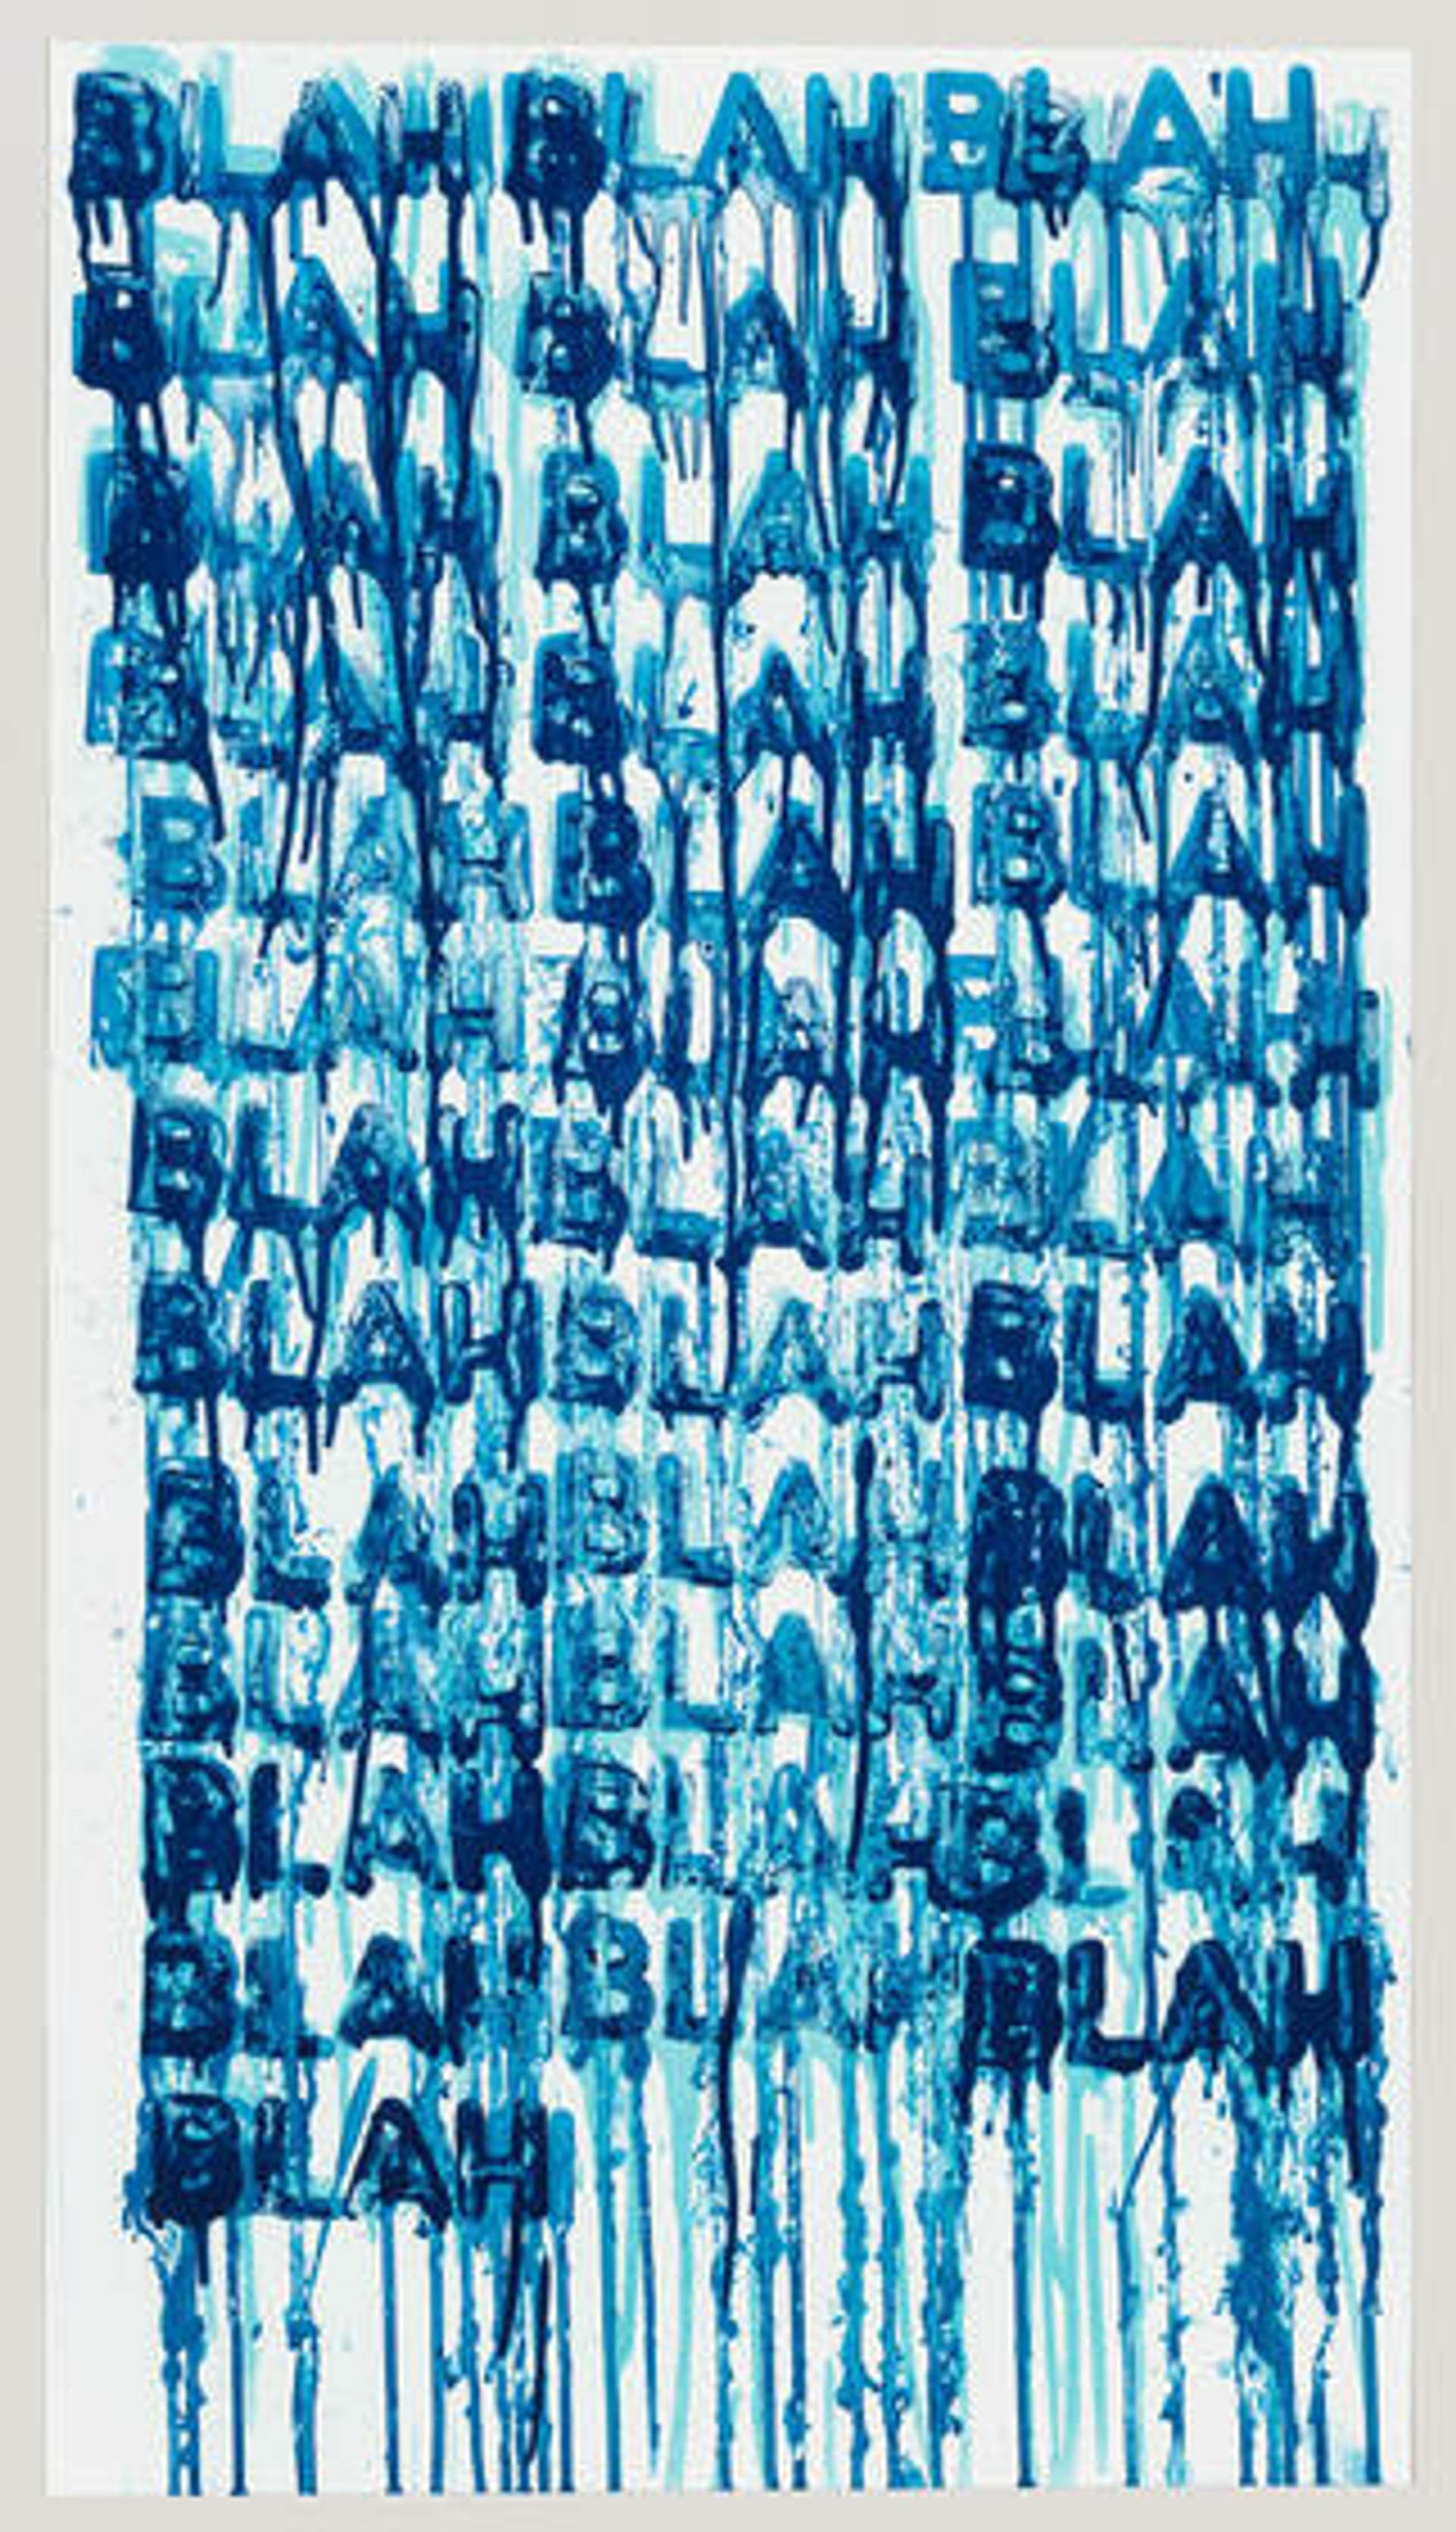 An artwork with a white background featuring repeated and dripping words in various shades of blue. The word "Blah" is repeated multiple times, creating a cascading effect of overlapping and blending blue hues.